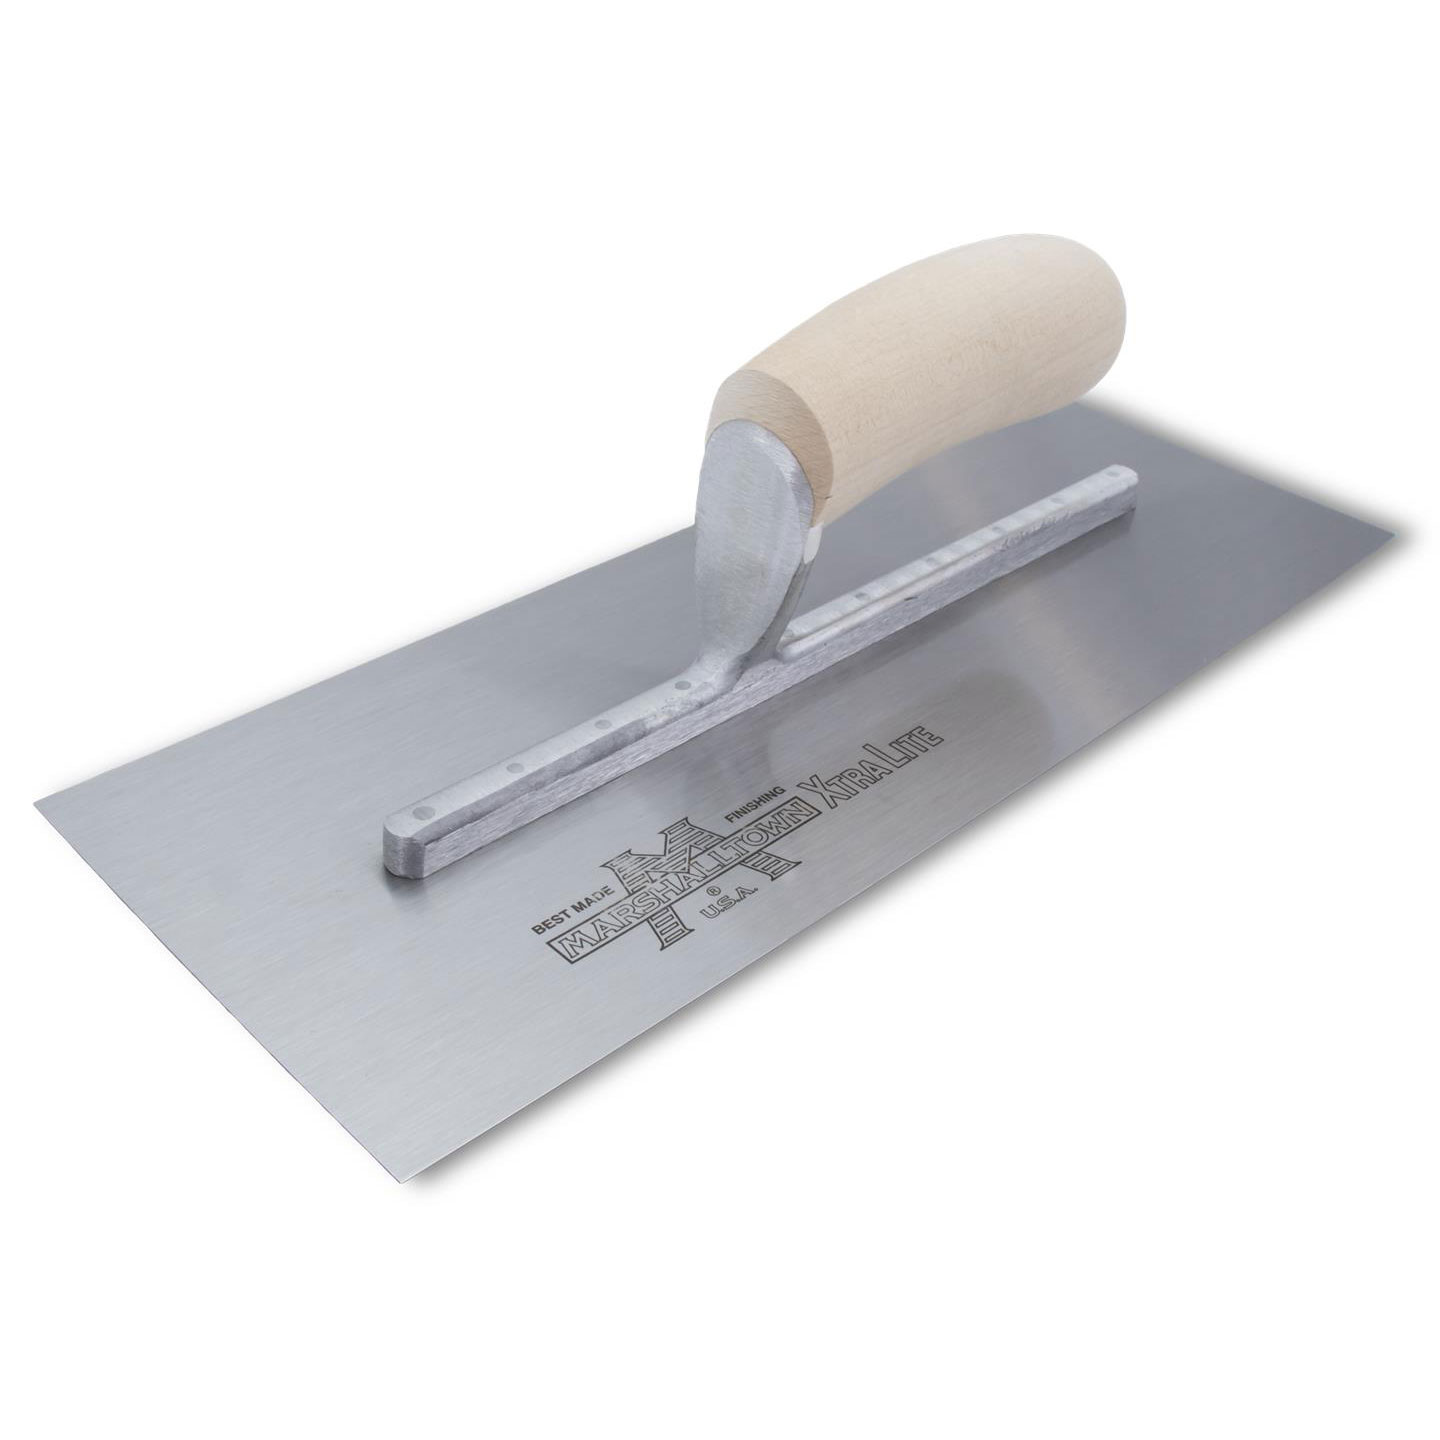 Marshalltown MXS58 14in x 3-1/2in Finishing Trowel with Curved Wood Handle MXS58